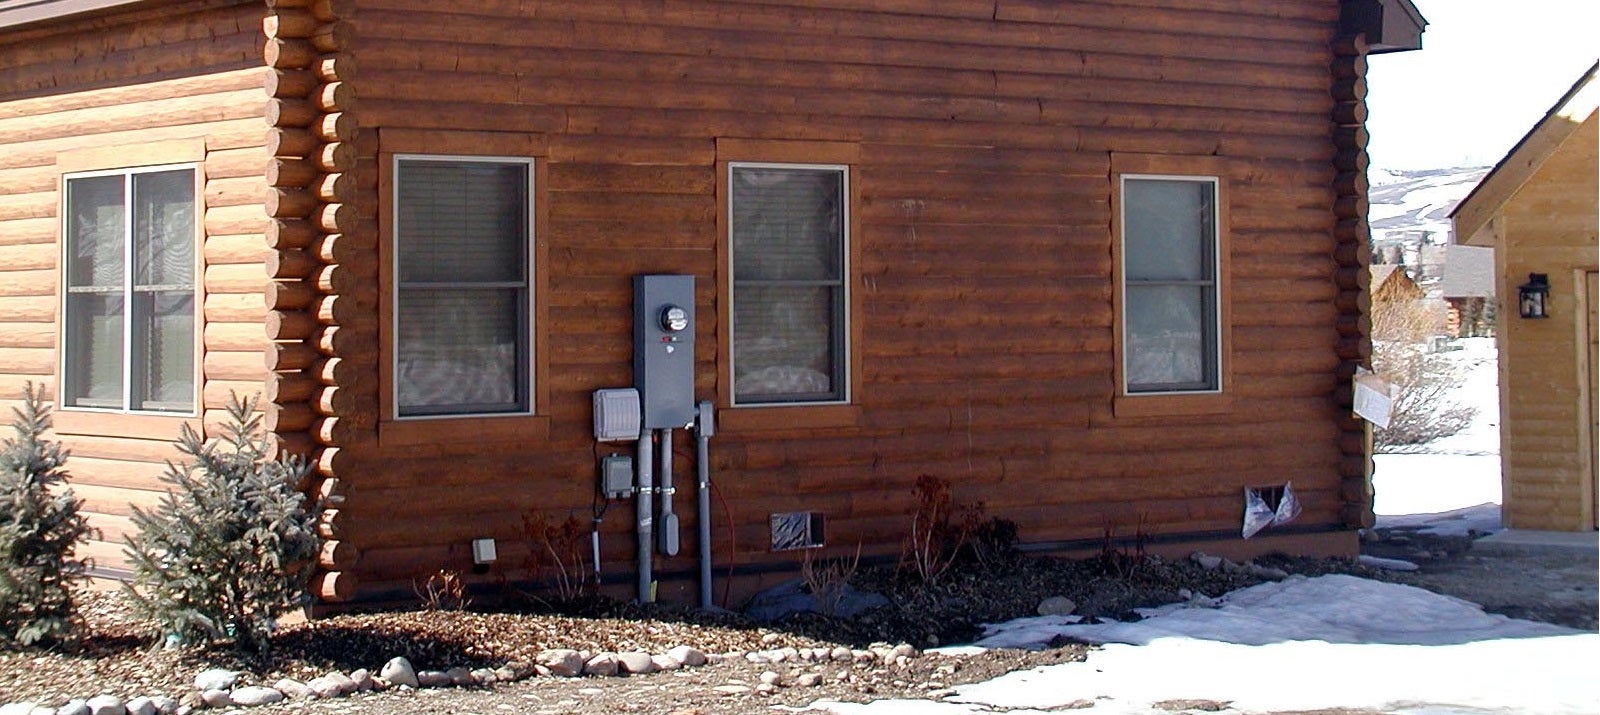 log house with electric meter attached to siding